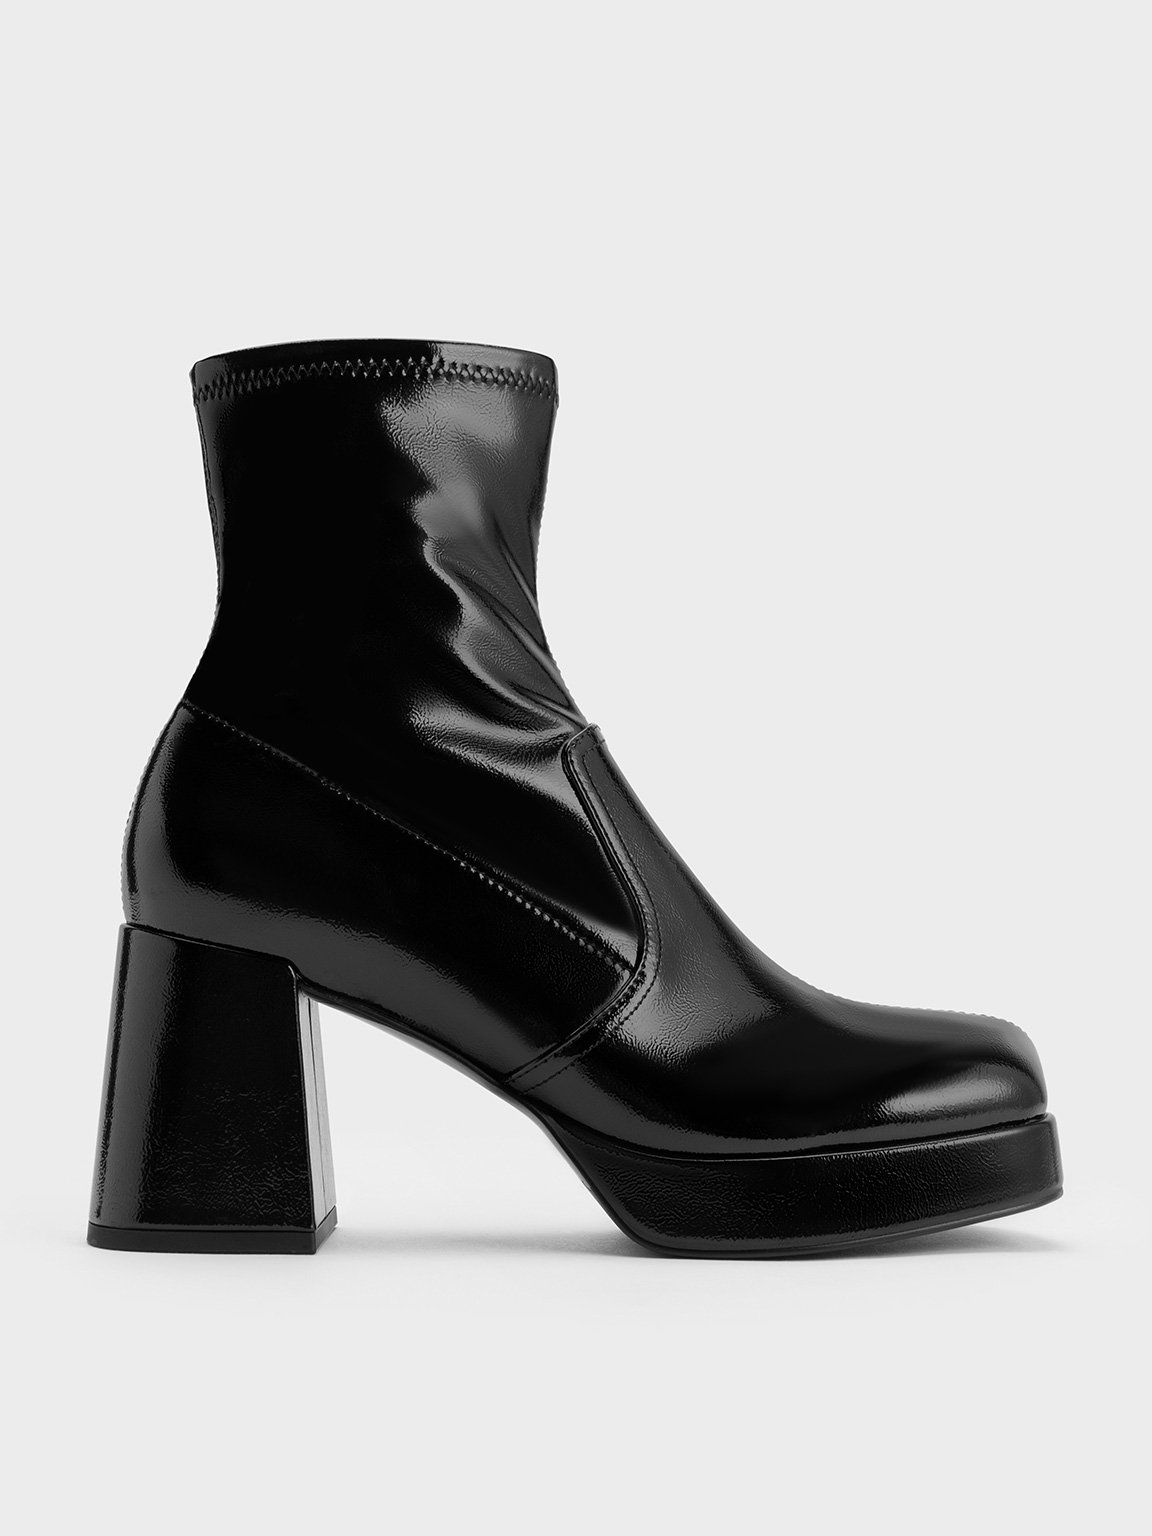 Faux Patent Leather Mid-Calf Boots Black Women's 8.5